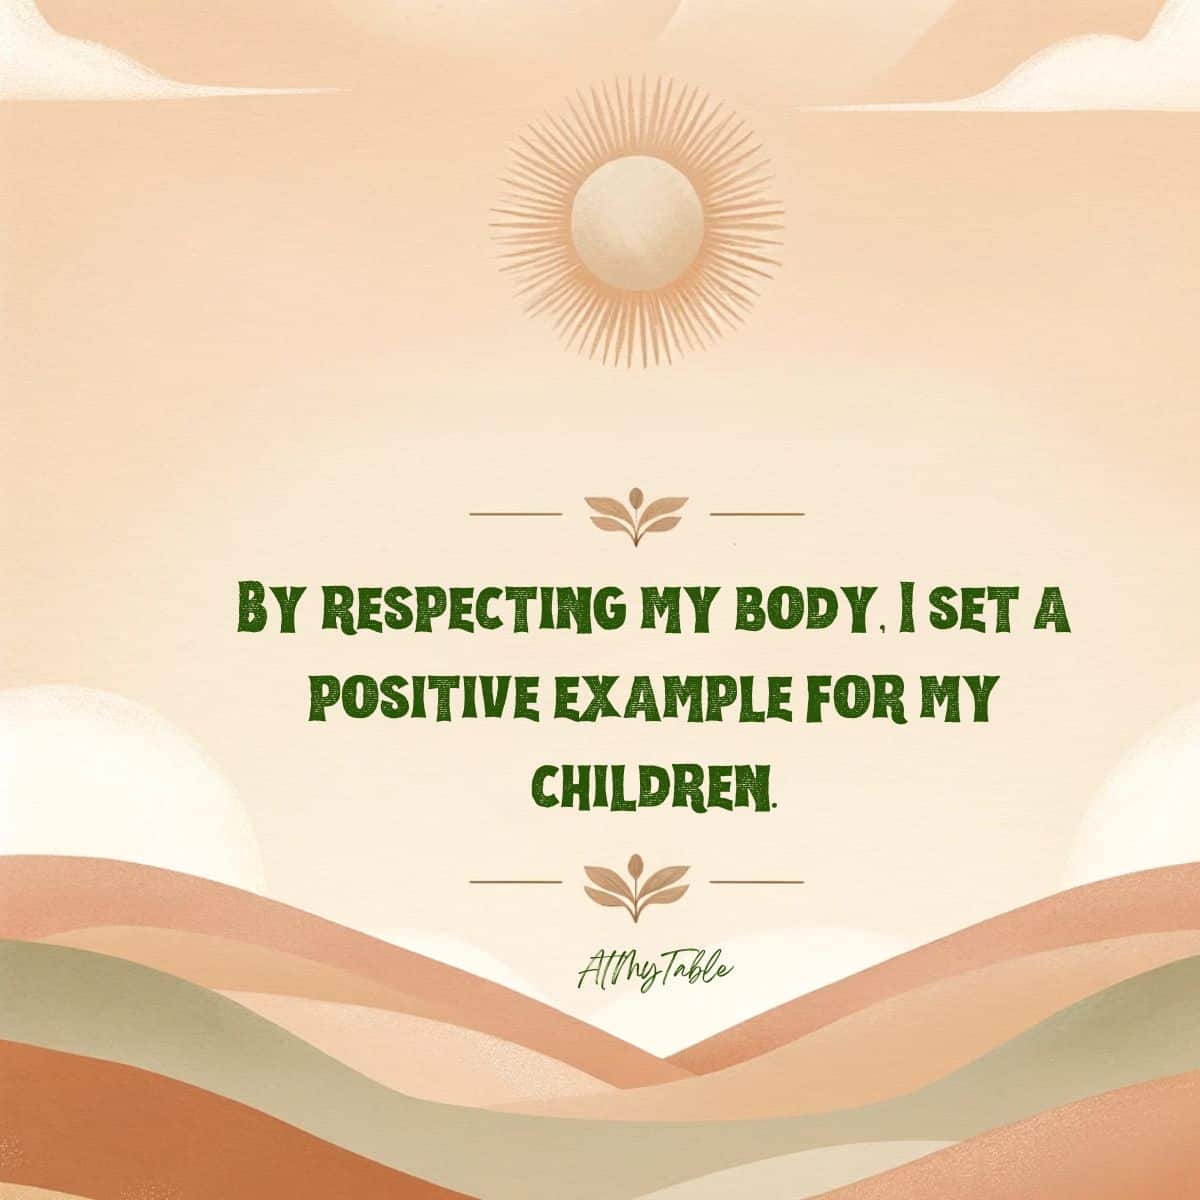 Affirmation text that reads By respecting my body, I set a positive example for my children. The text is srrounded by colors of orange, greens and pink swirls with a cartoon sun.